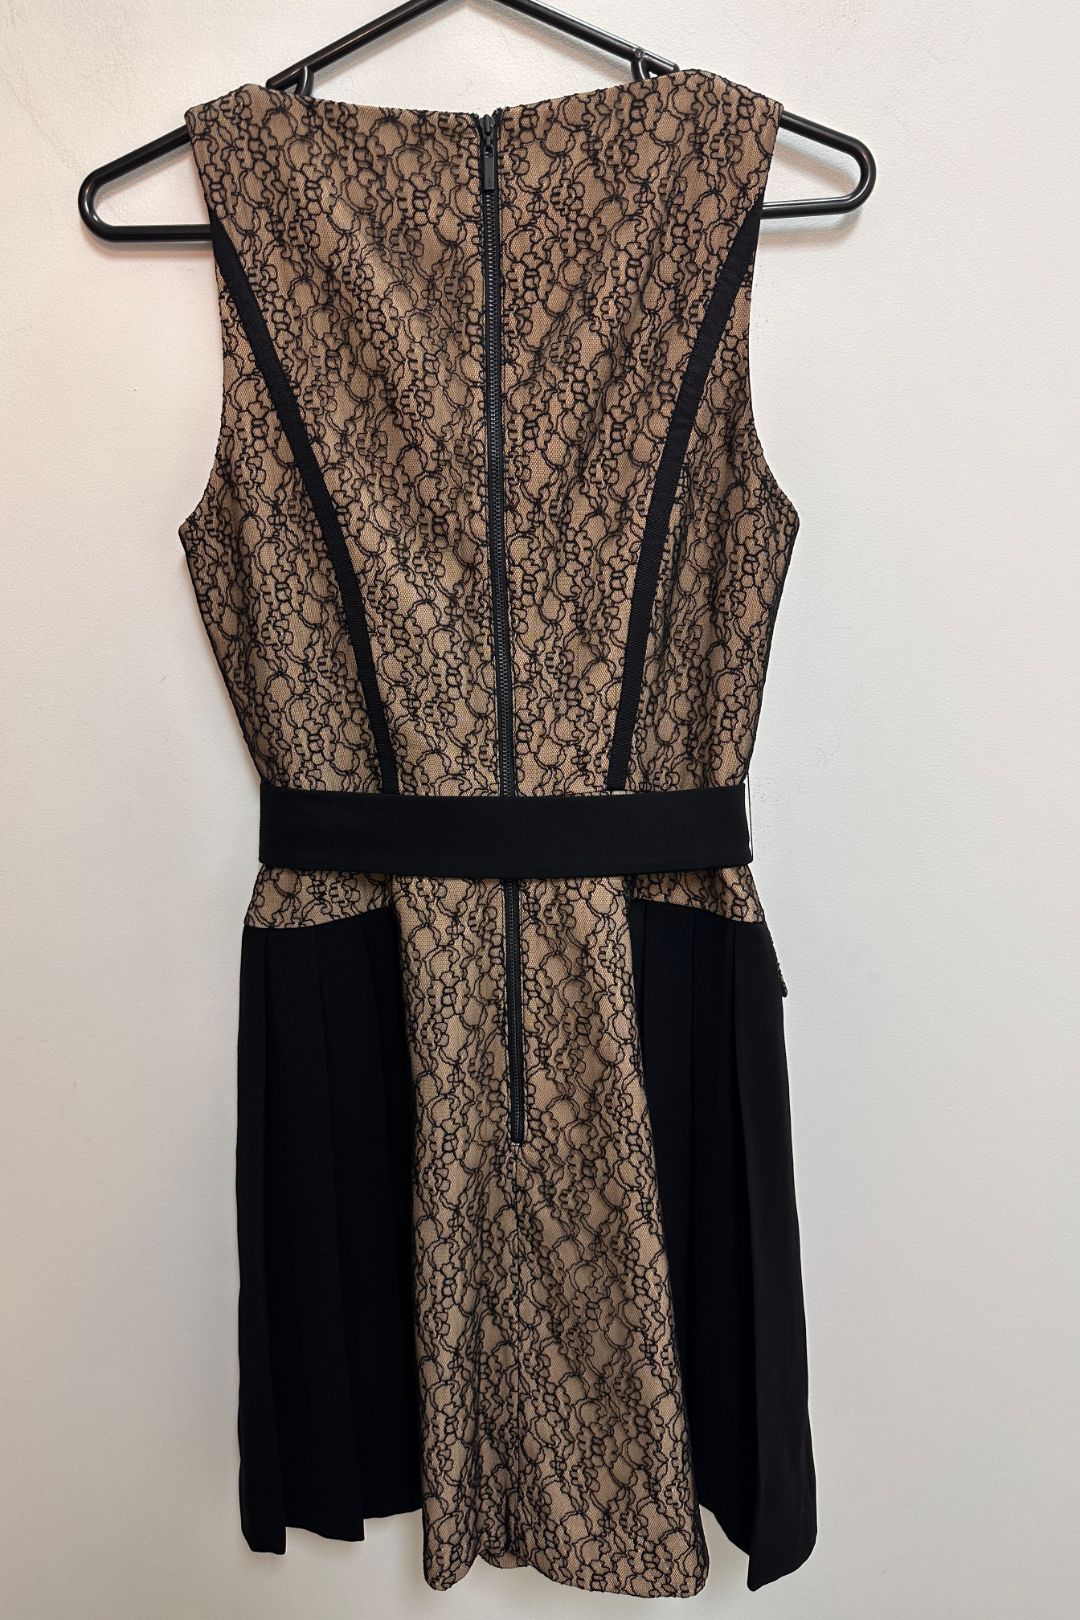 Cue in Black and Beige Lace Dress